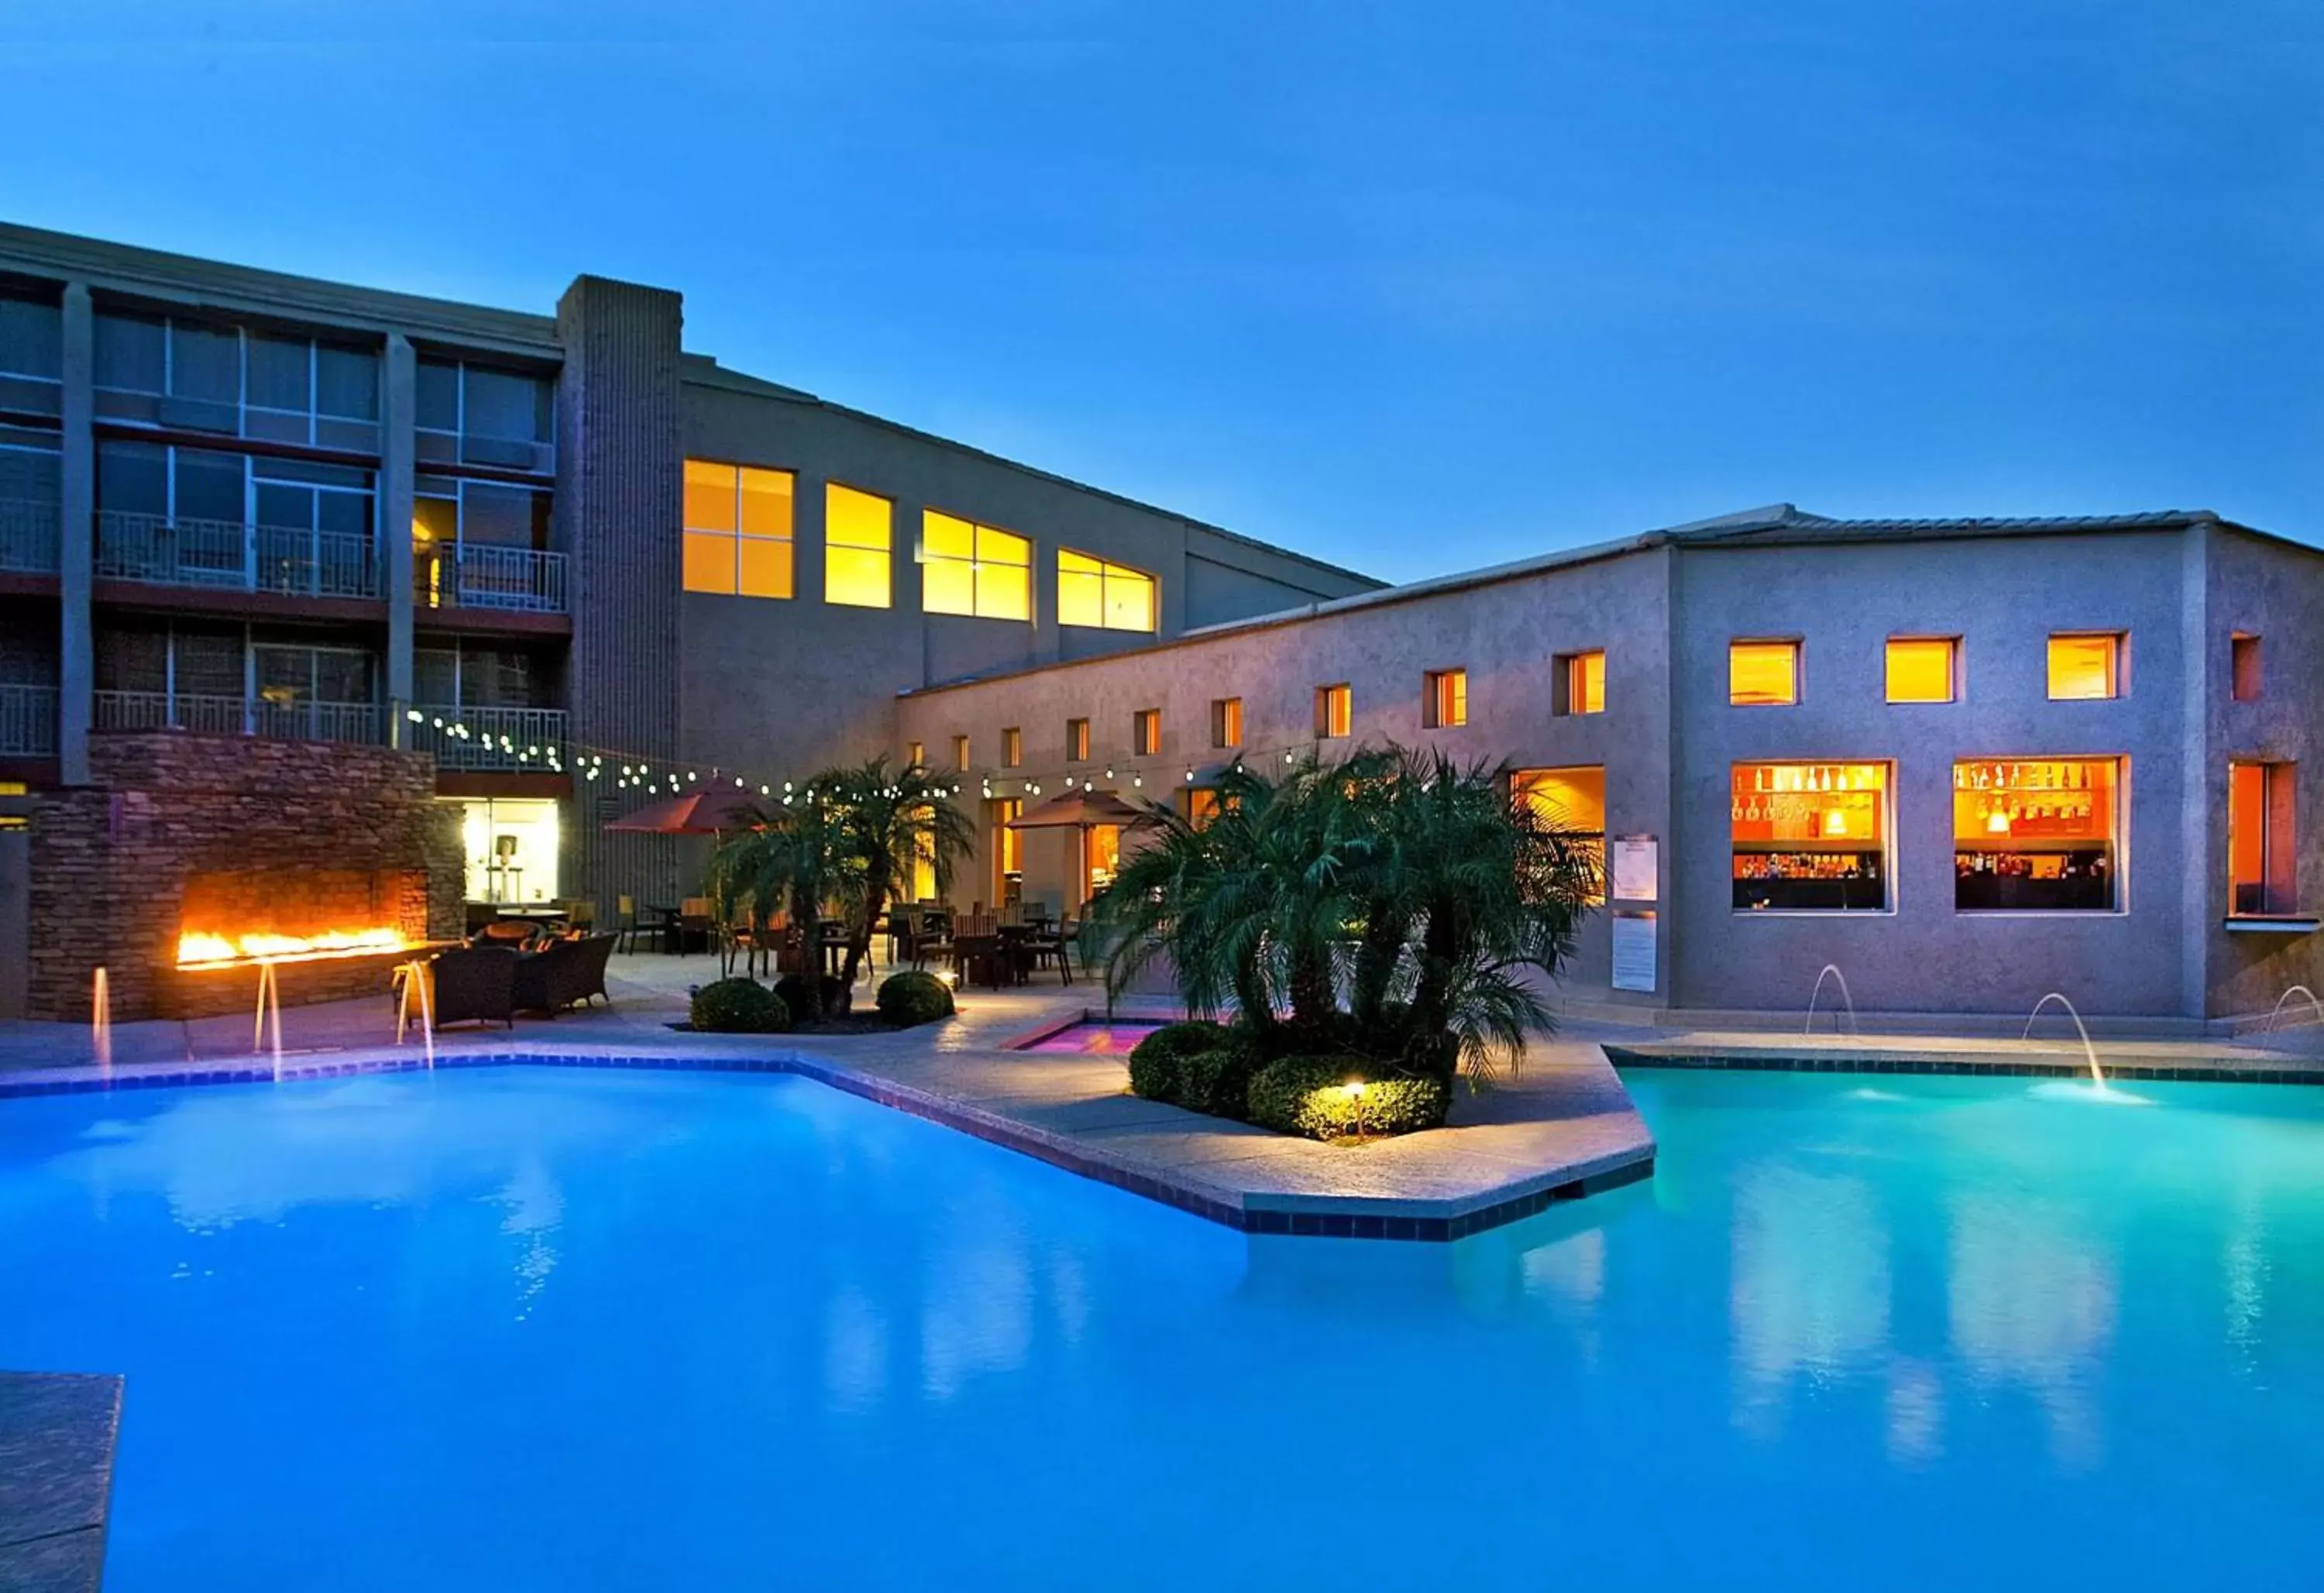 Pool view, Property Building in Wyndham Phoenix Airport - Tempe